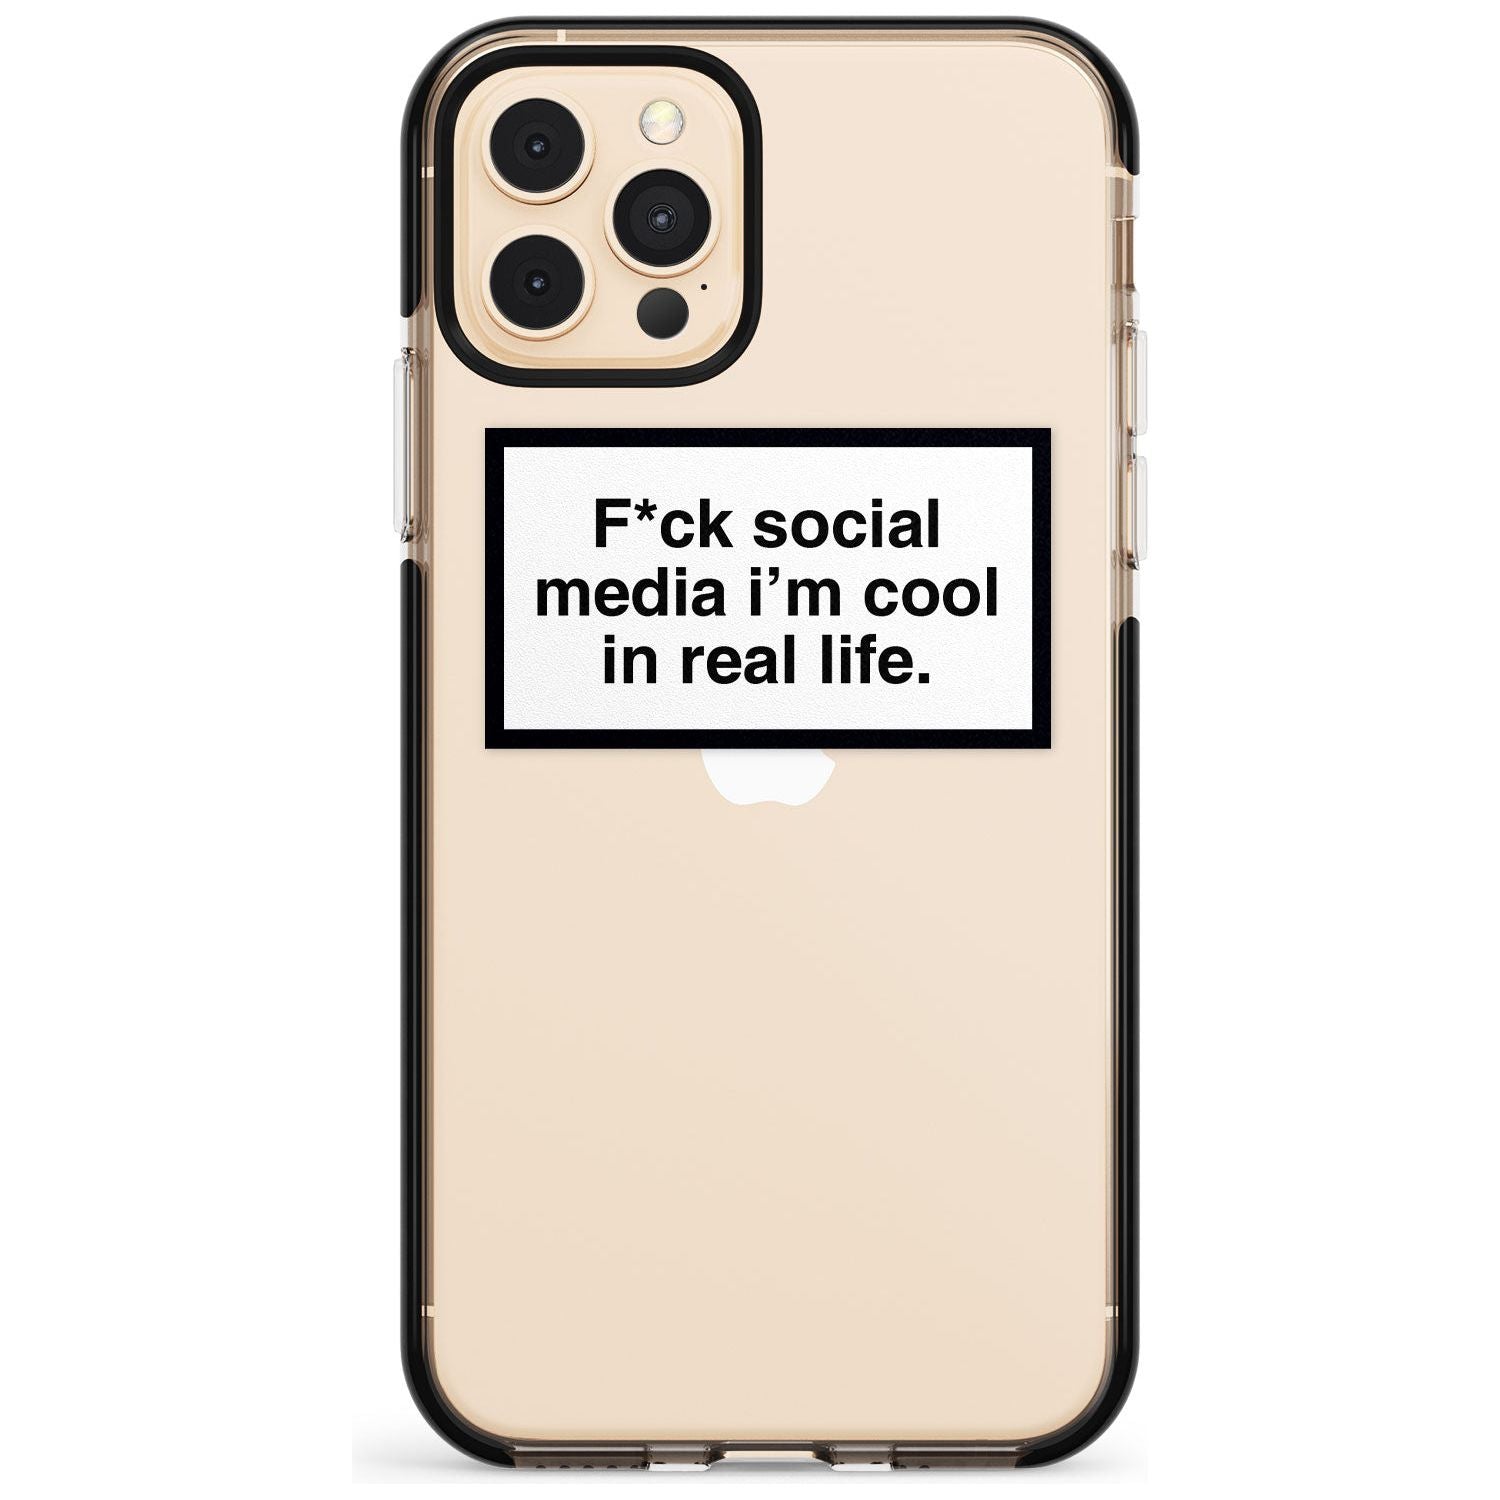 F*ck social media I'm cool in real life Pink Fade Impact Phone Case for iPhone 11